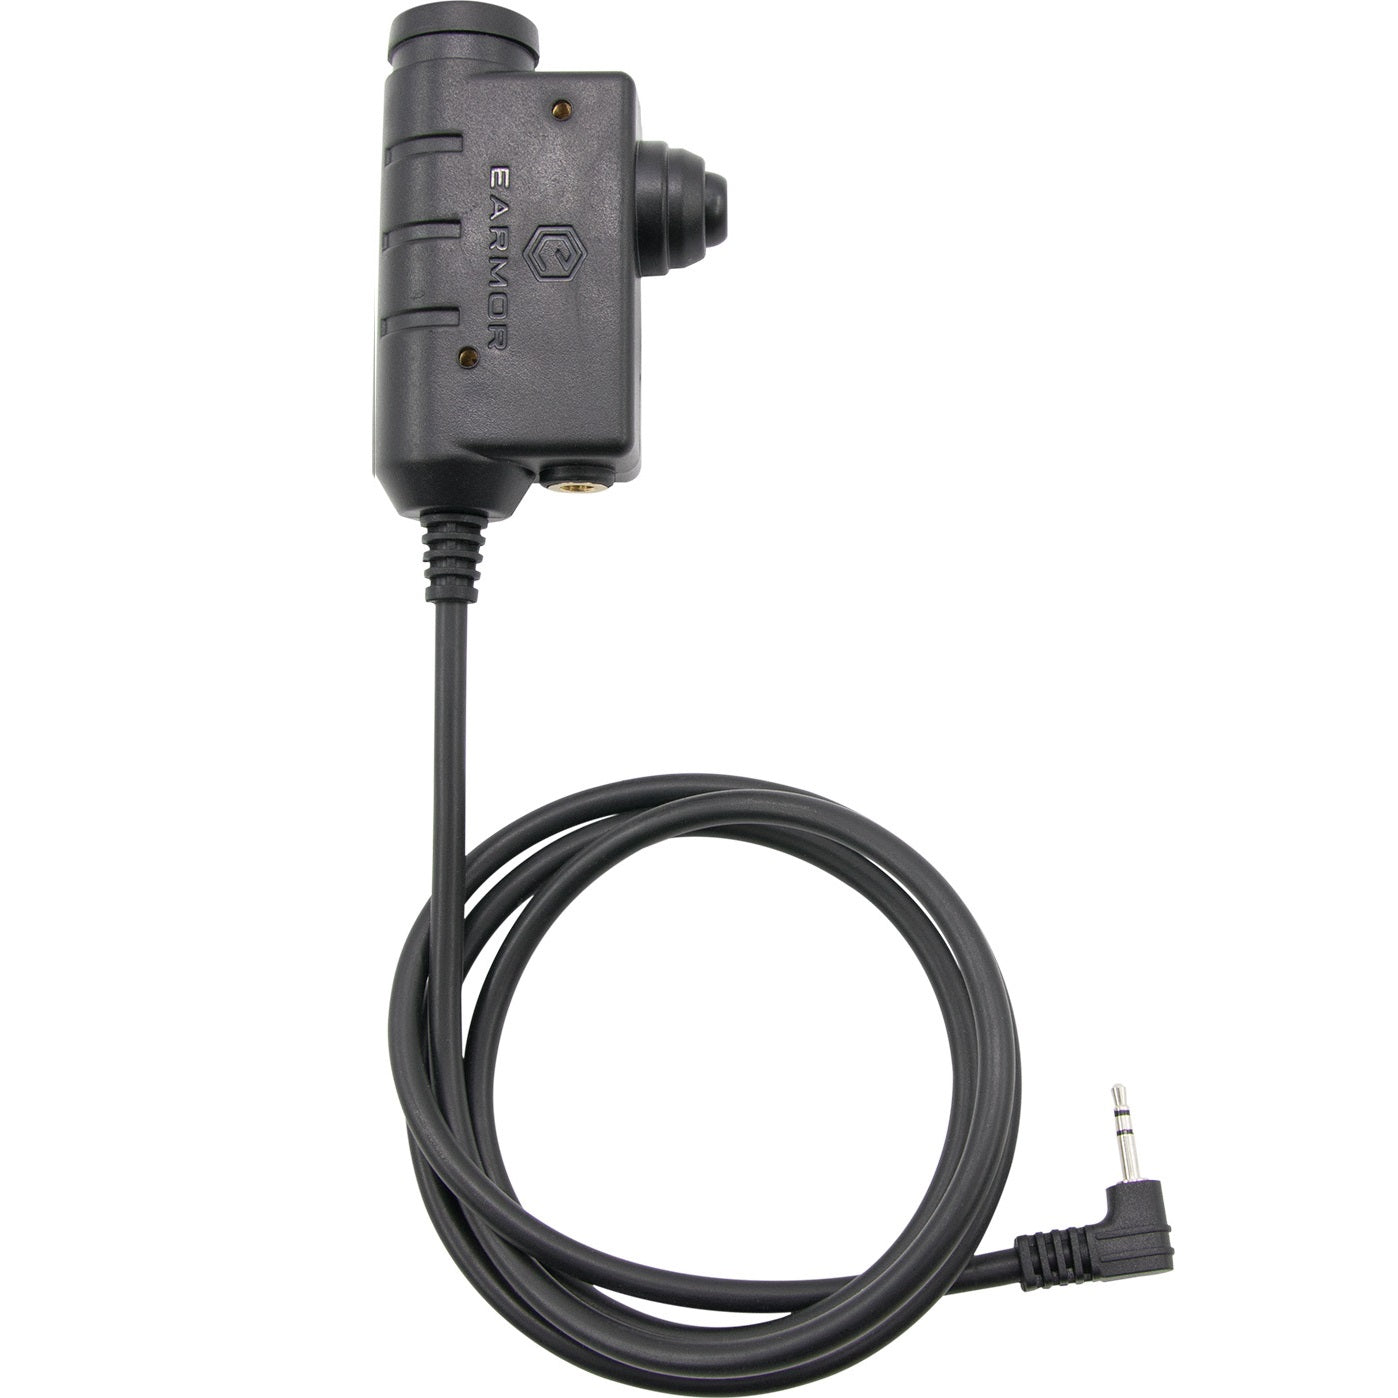 Push To Talk Radio Adapter for Airsoft & Recreation Headset: NATO